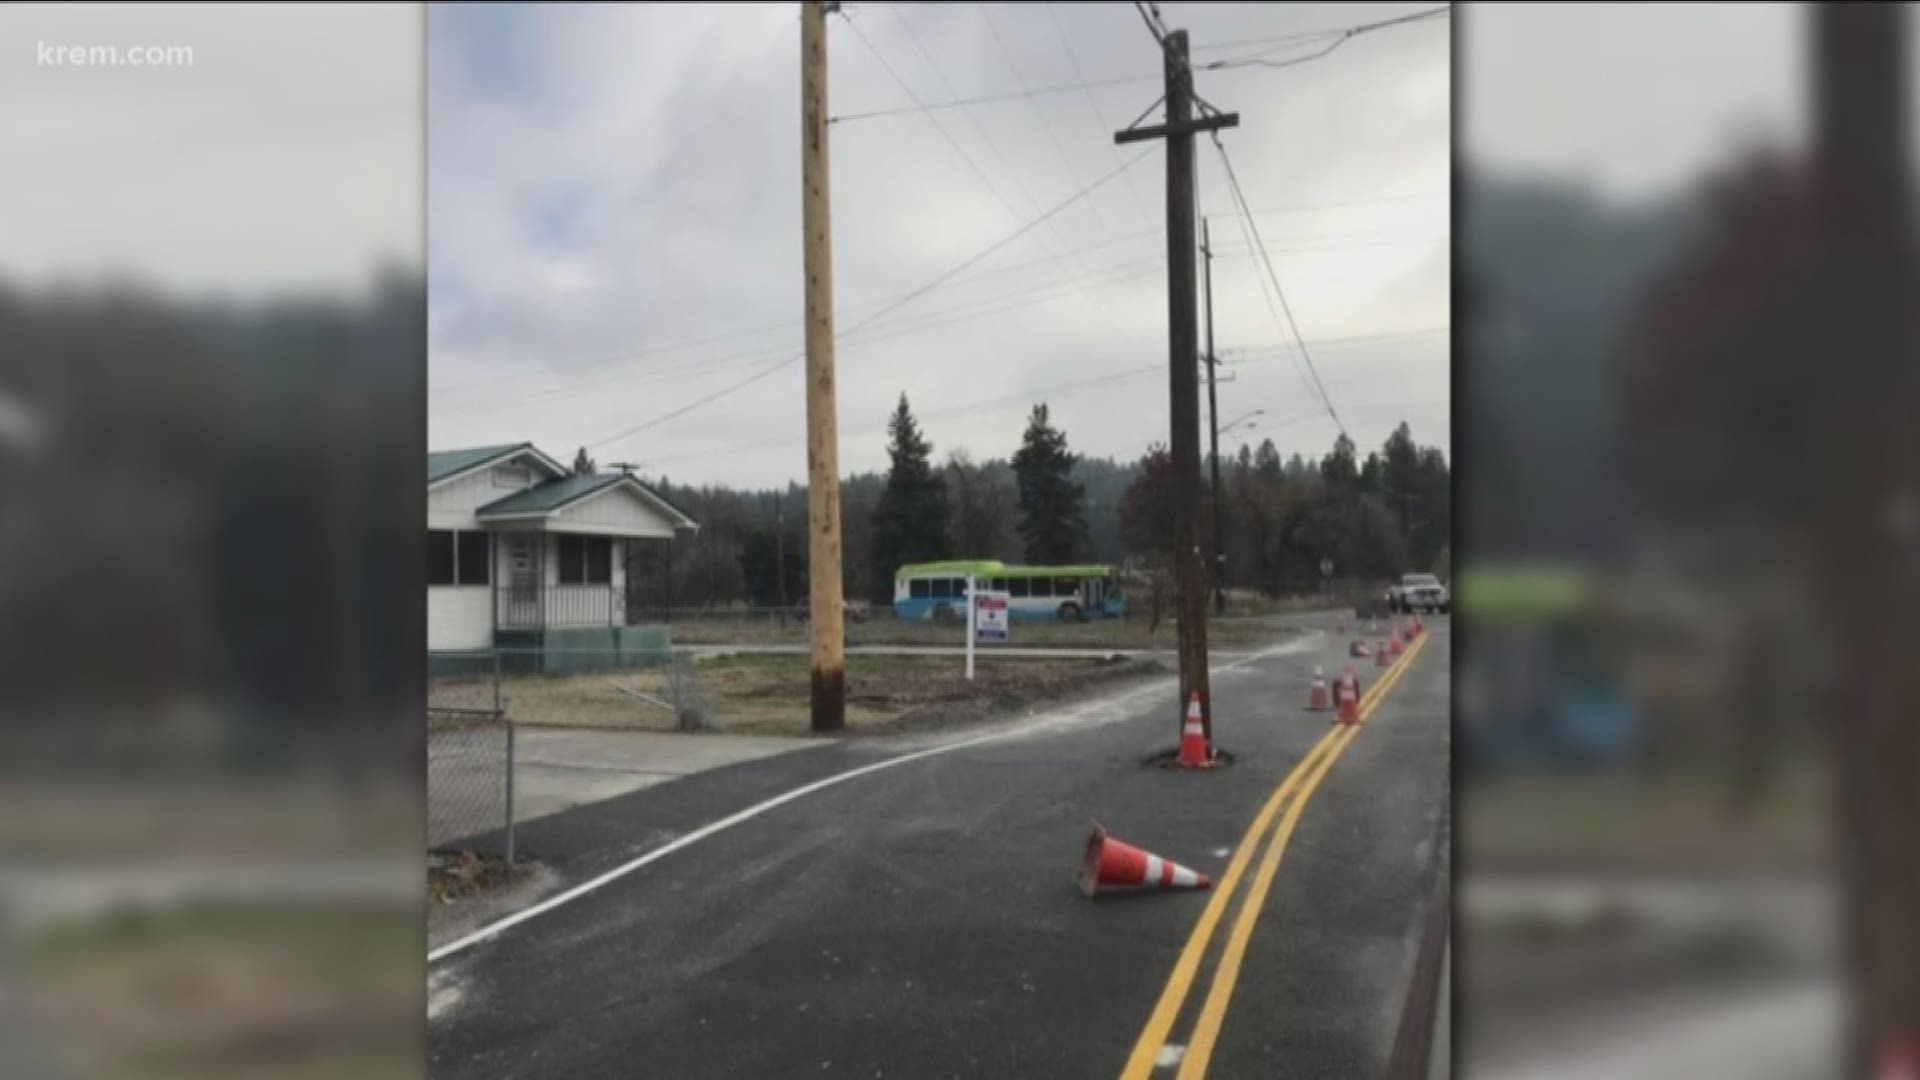 The intersection historically has a lot of crashes, so Spokane Valley is working to cut down on them by better aligning the road.